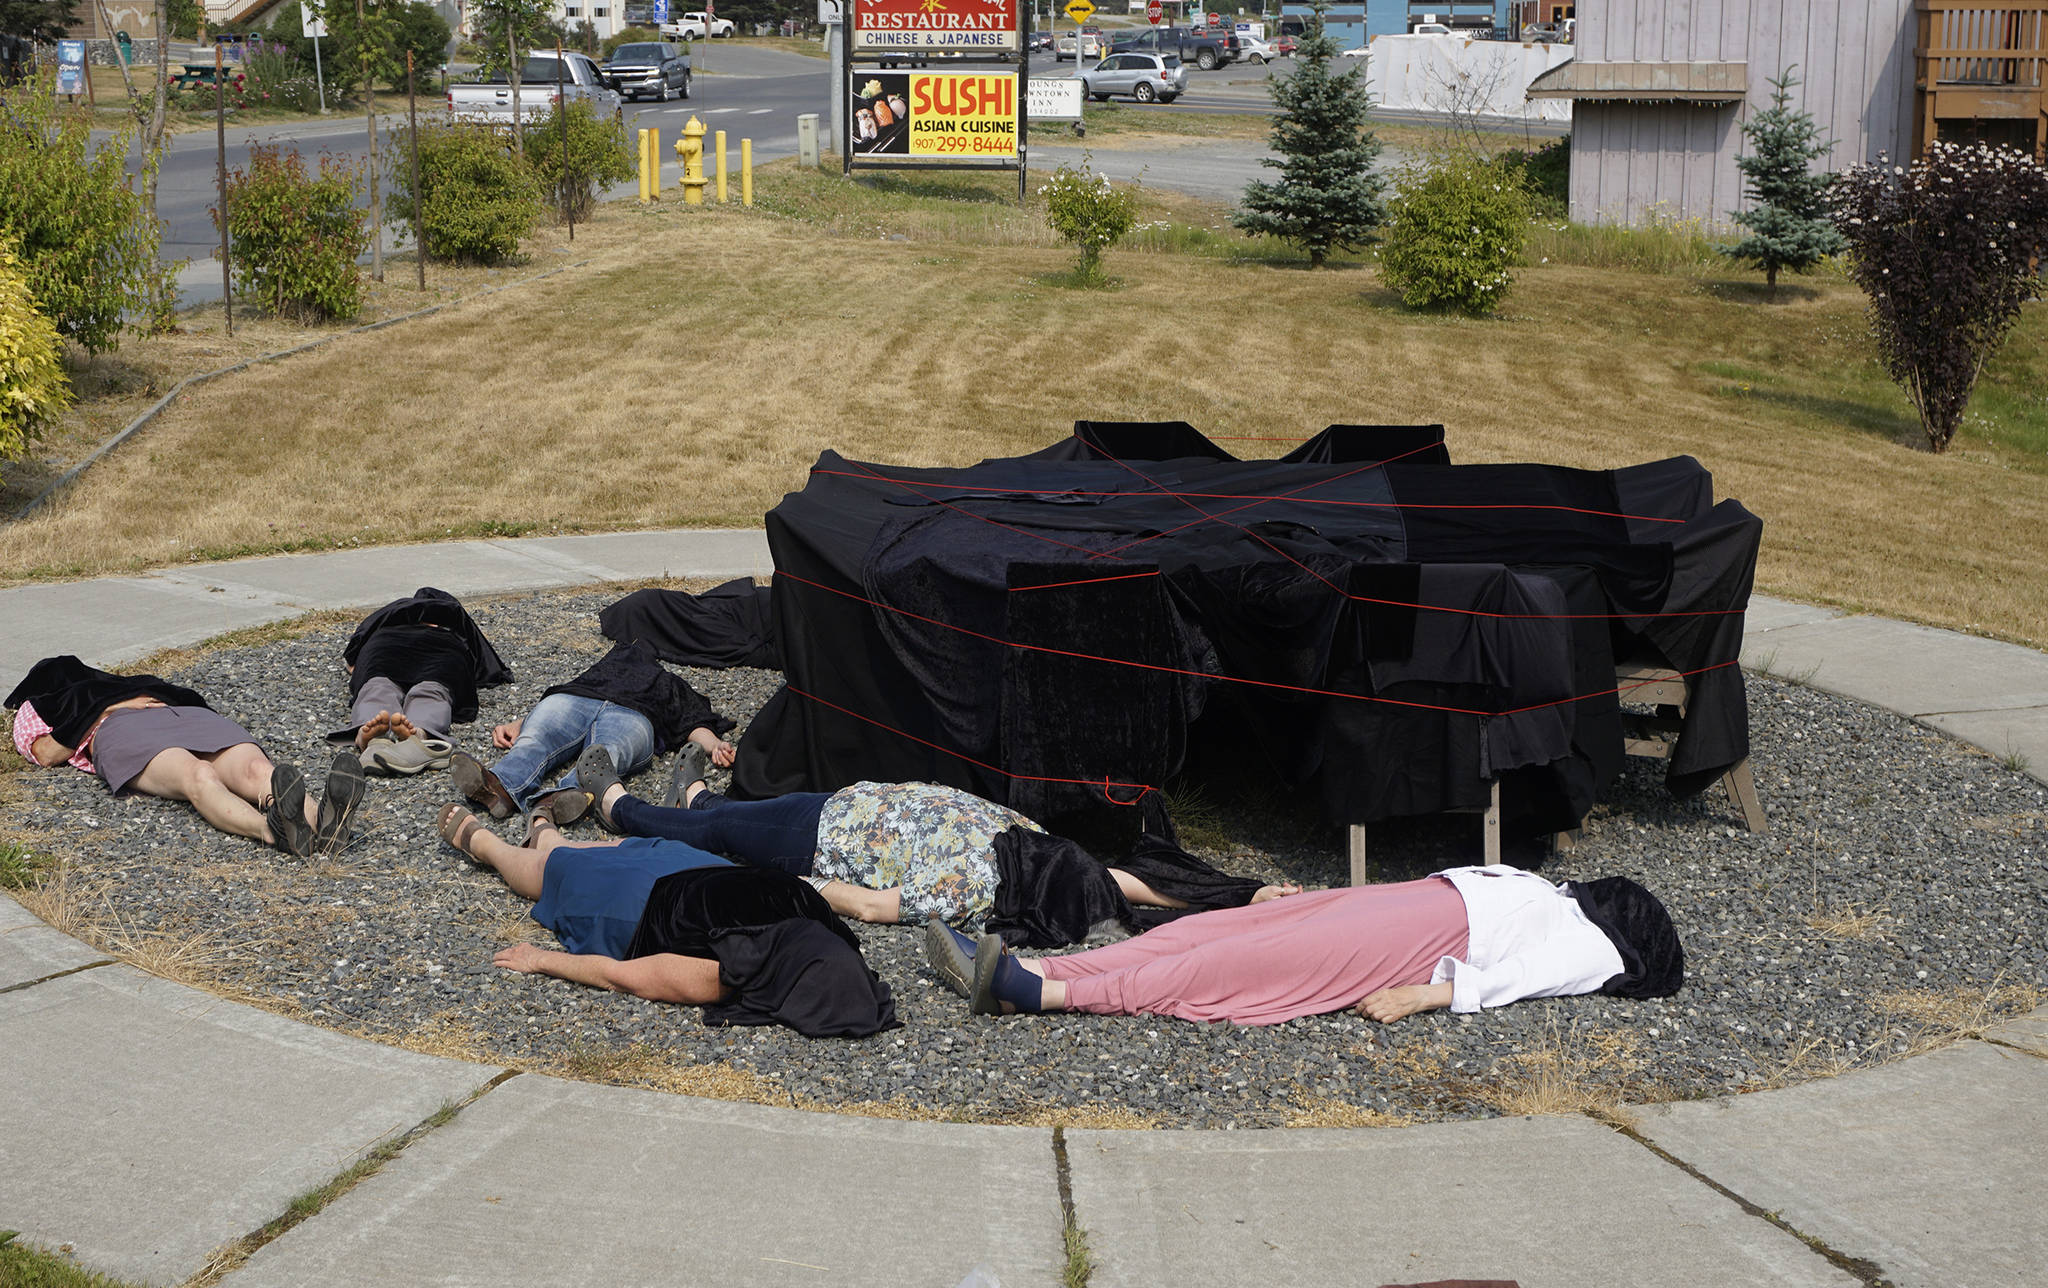 People draped in black lie down on July 9, 2019, by Sean Derry’s public art sculpture in Homer, Alaska, as part of a statewide art intervention to protest Gov. Mike Dunleavy’s veto of a $700,000 state appropriation to the Alaska State Council on the Arts. They also supported a general override of Dunleavy’s vetoes that will affect funding for the University of Alaska, public radio and other programs. Derry’s sculpture was commissioned as a 1% for art project associated with the remodeling of Pioneer Hall at the Kachemak Bay Campus, Kenai Peninsula College, University of Alaska. The protest was not sanctioned by the college. (Photo by Michael Armstrong/Homer News)